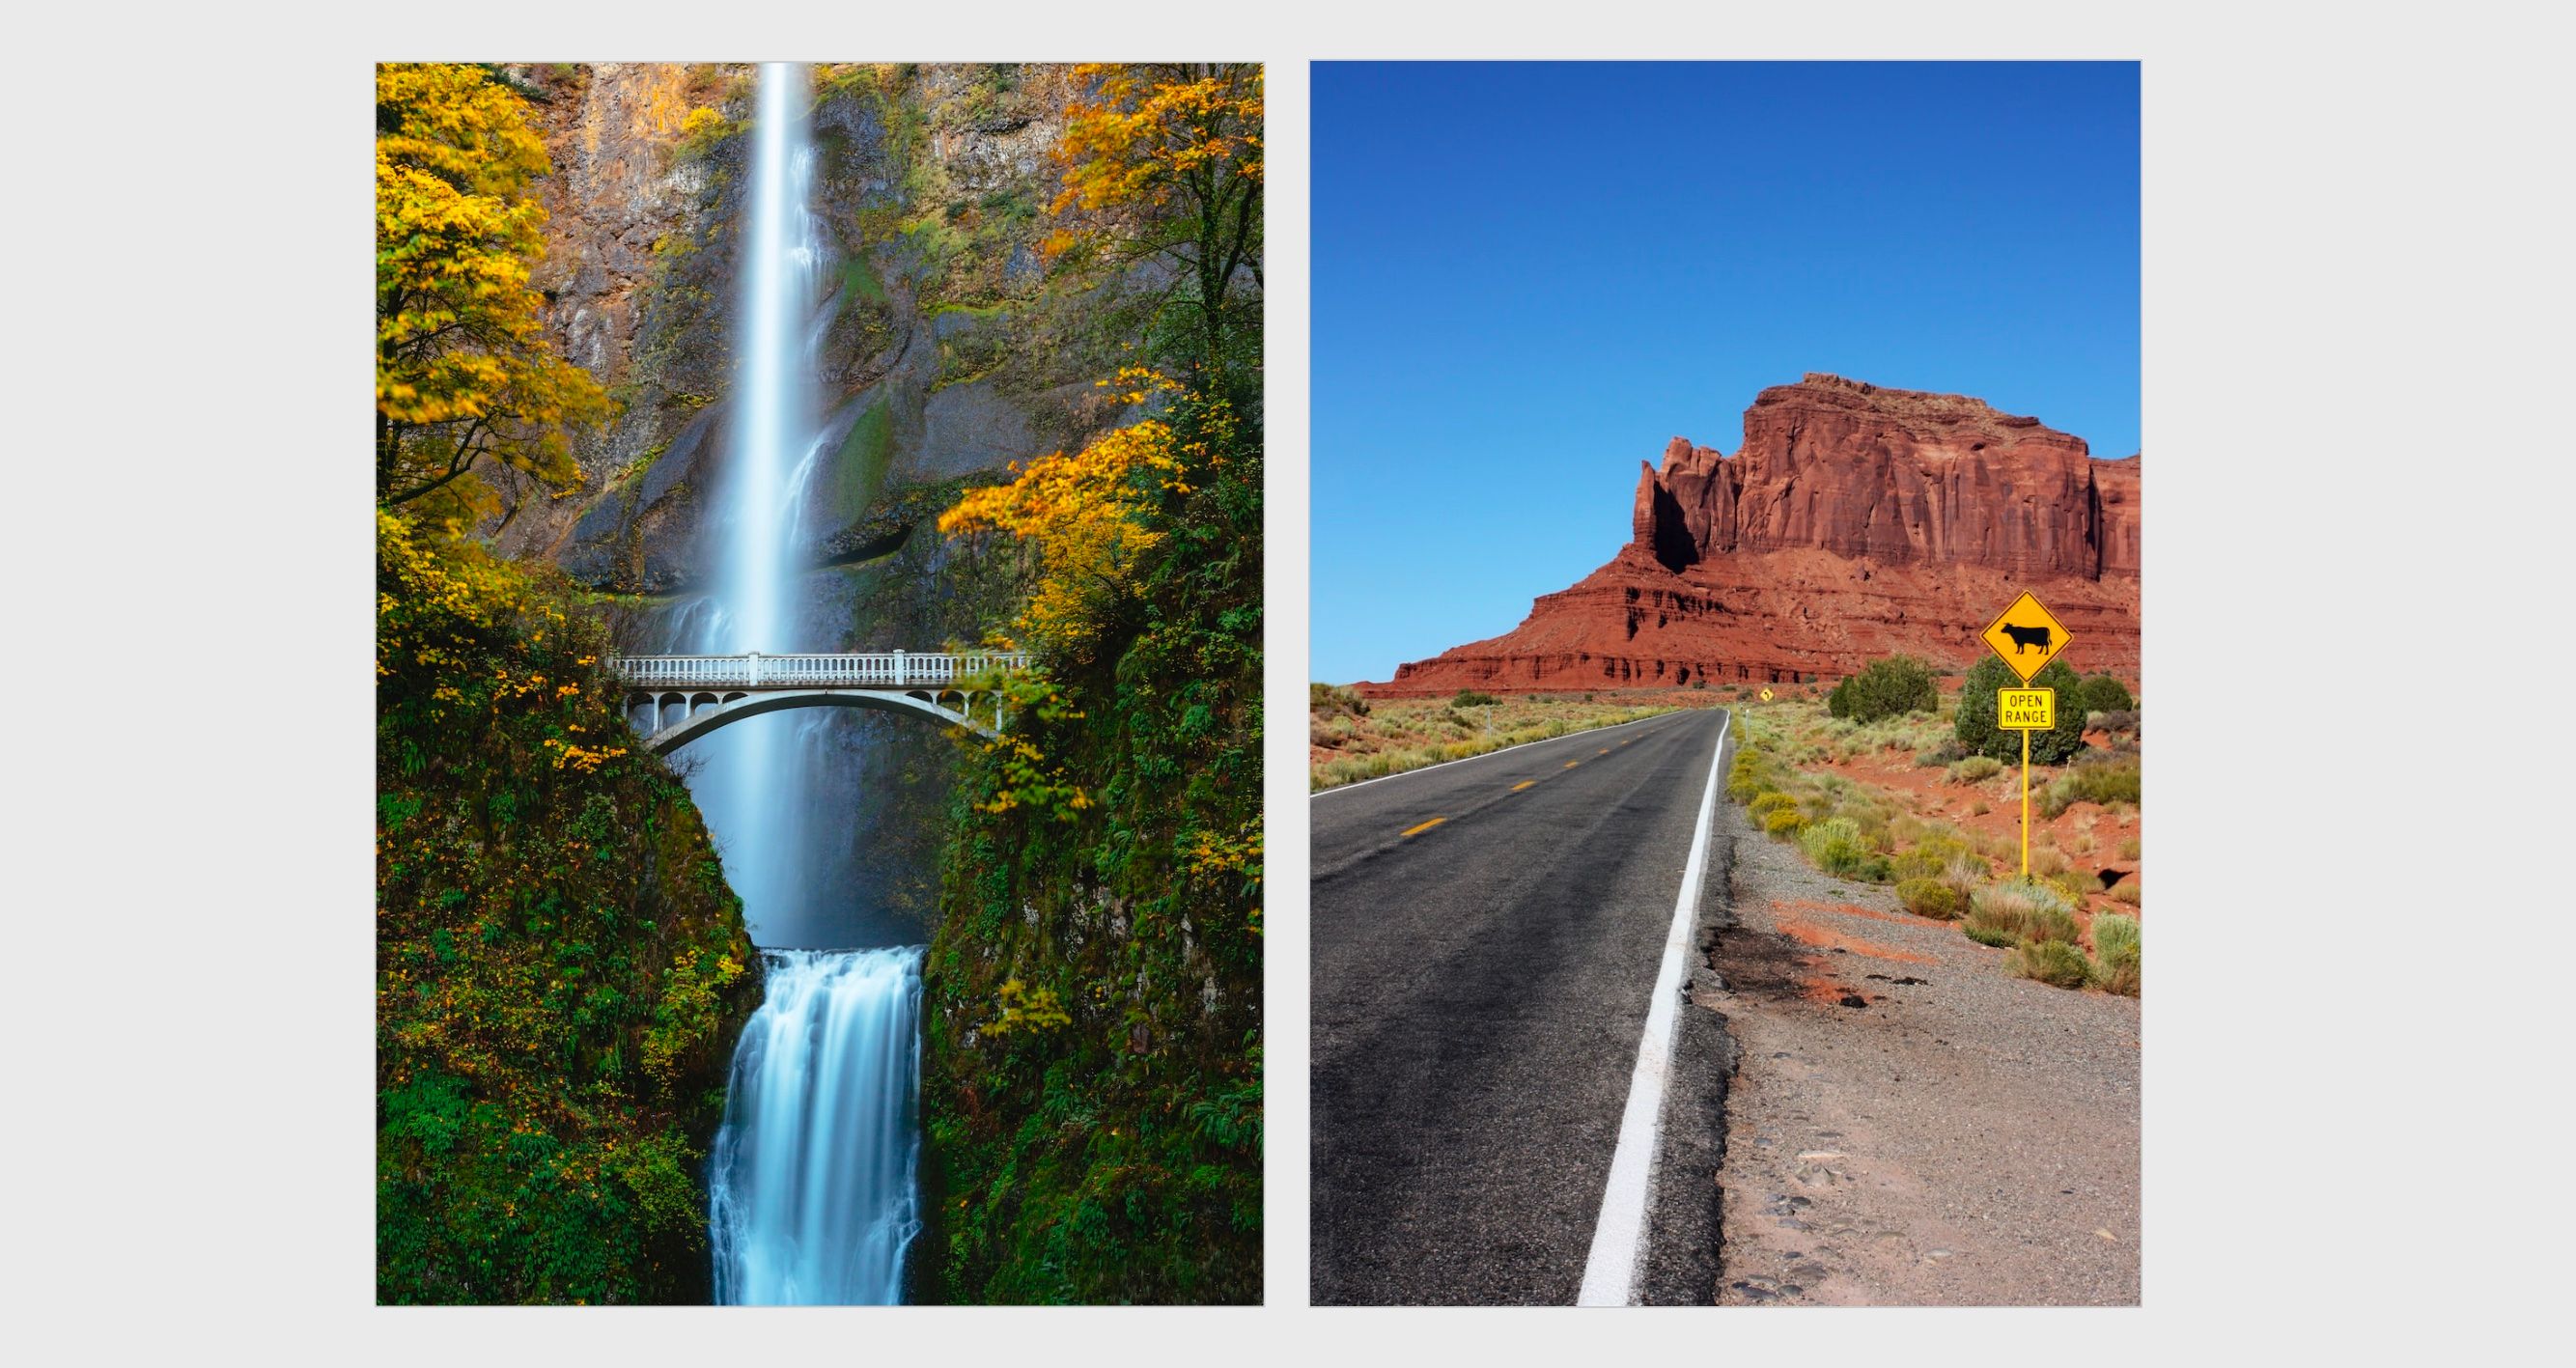 Two portrait photos, one of a waterfall and one of a desert road